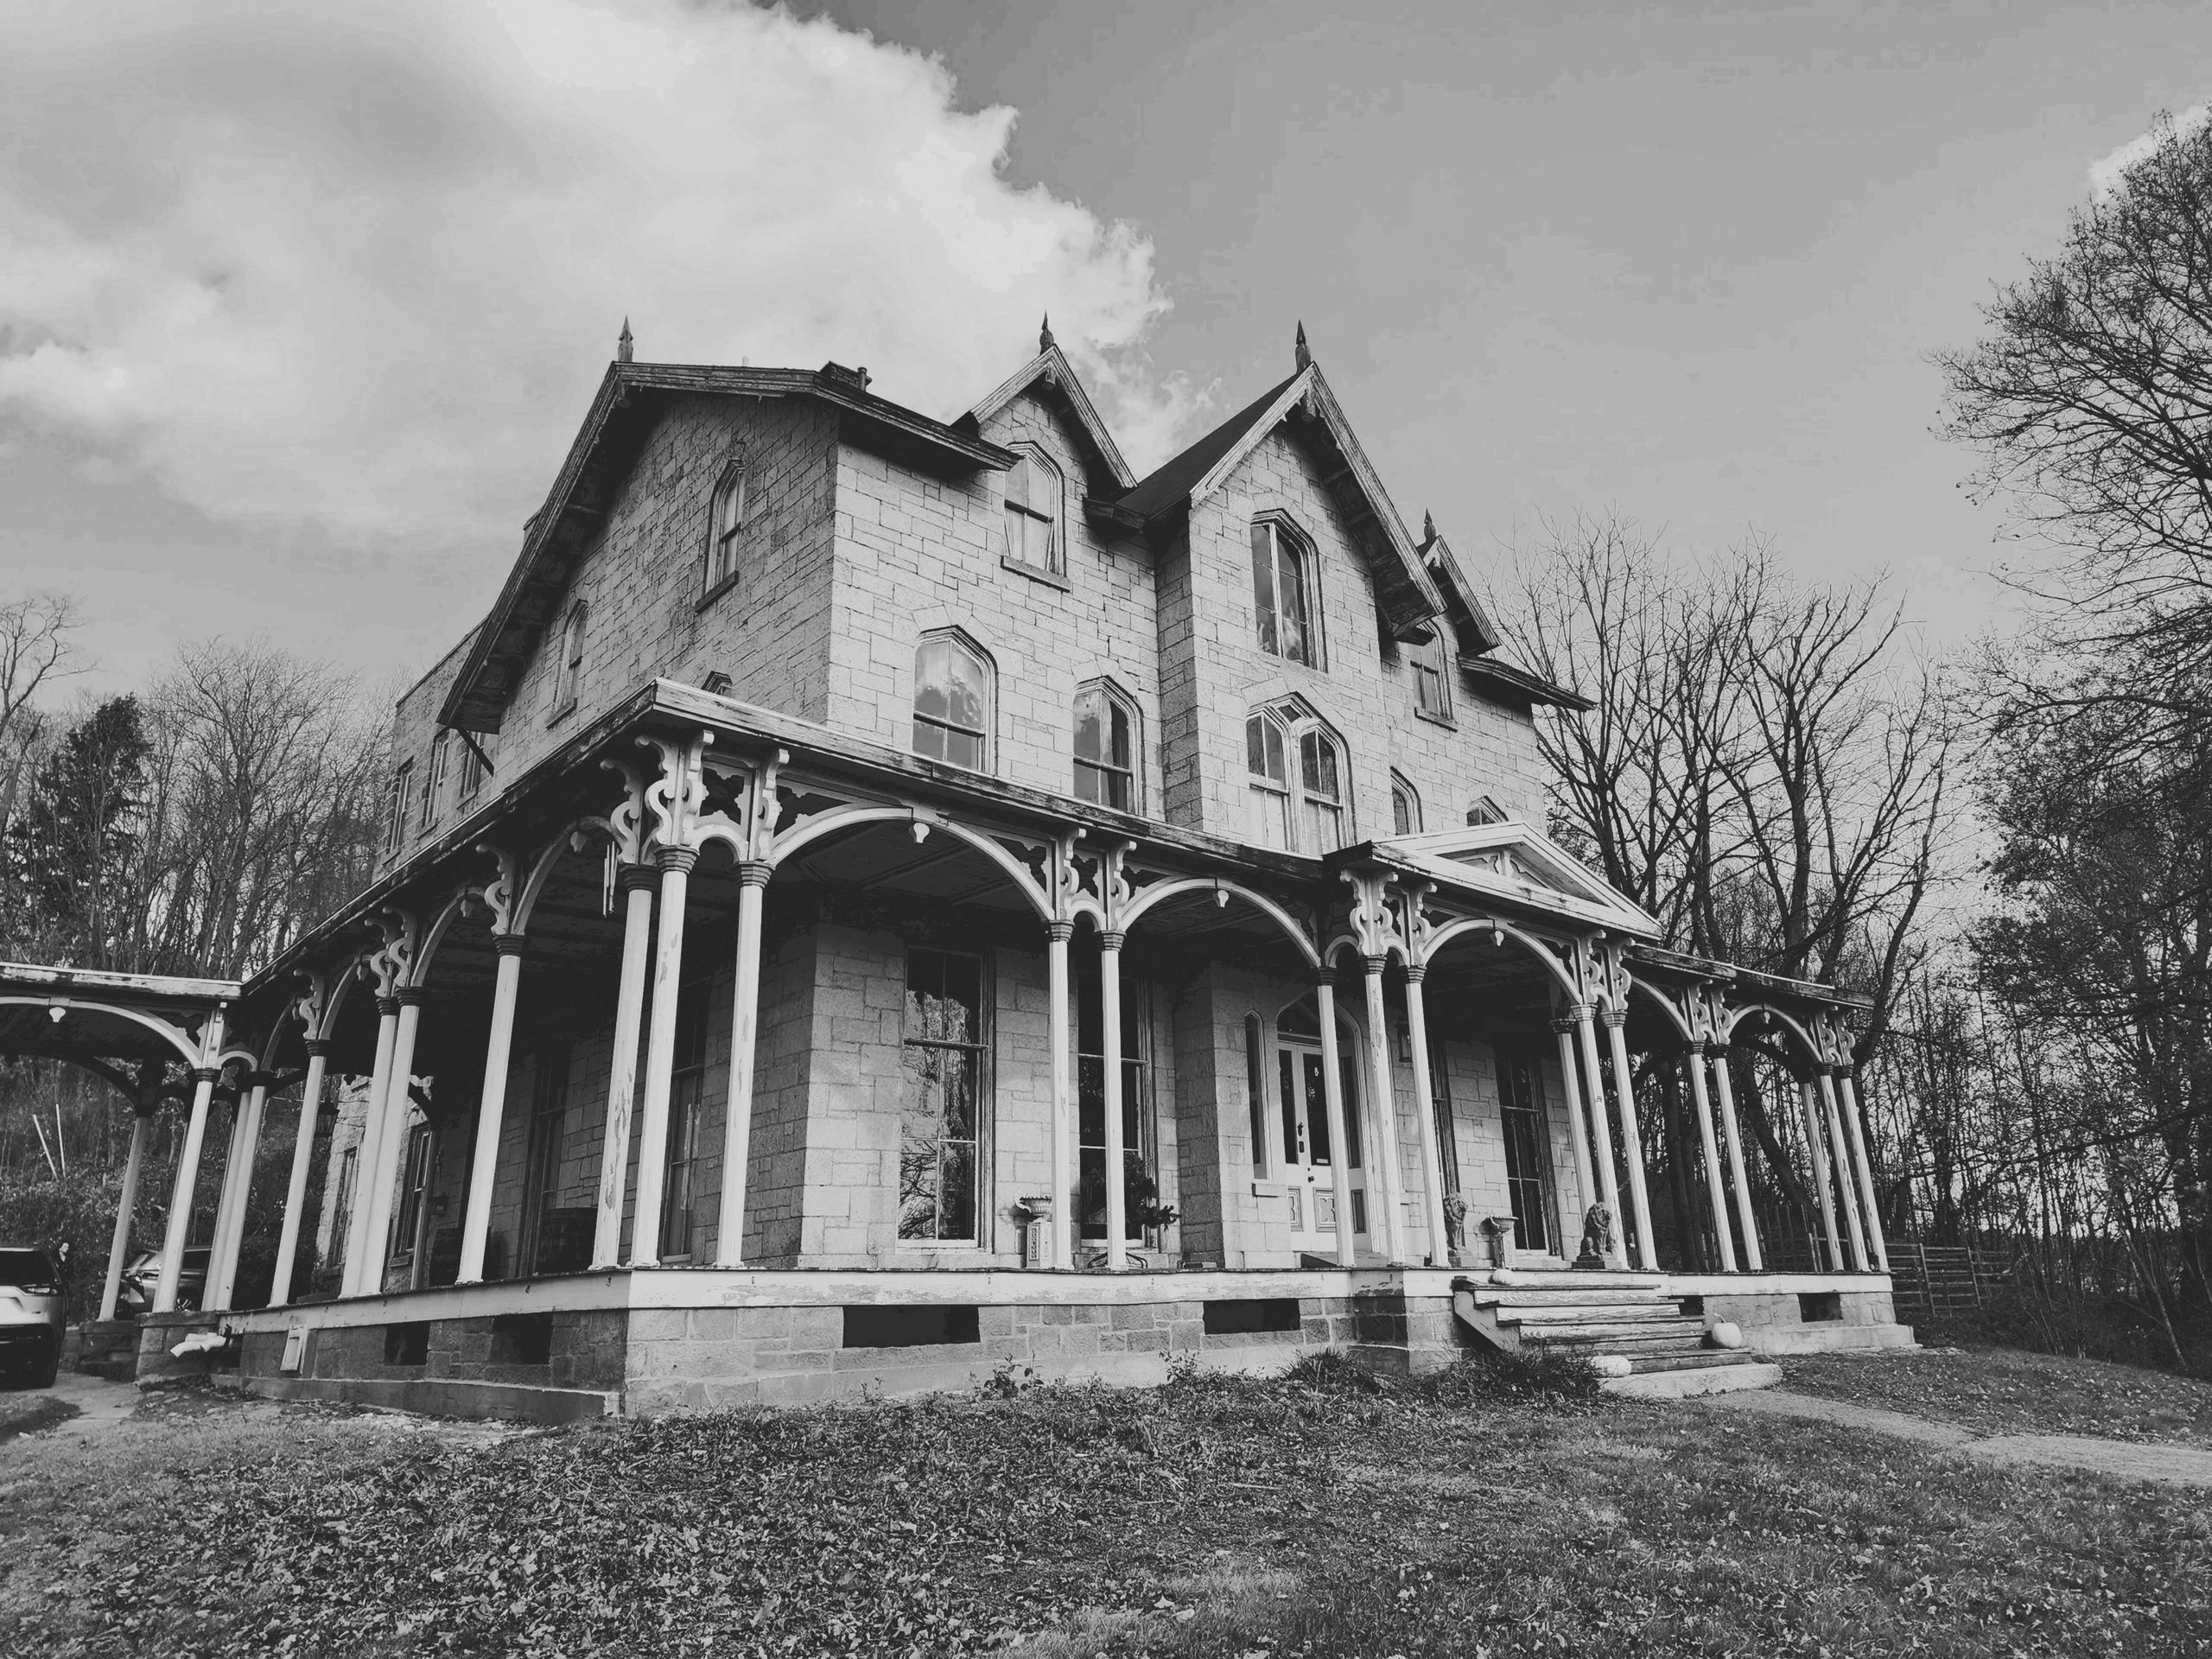 Black and White Image of the Irvin Manor 